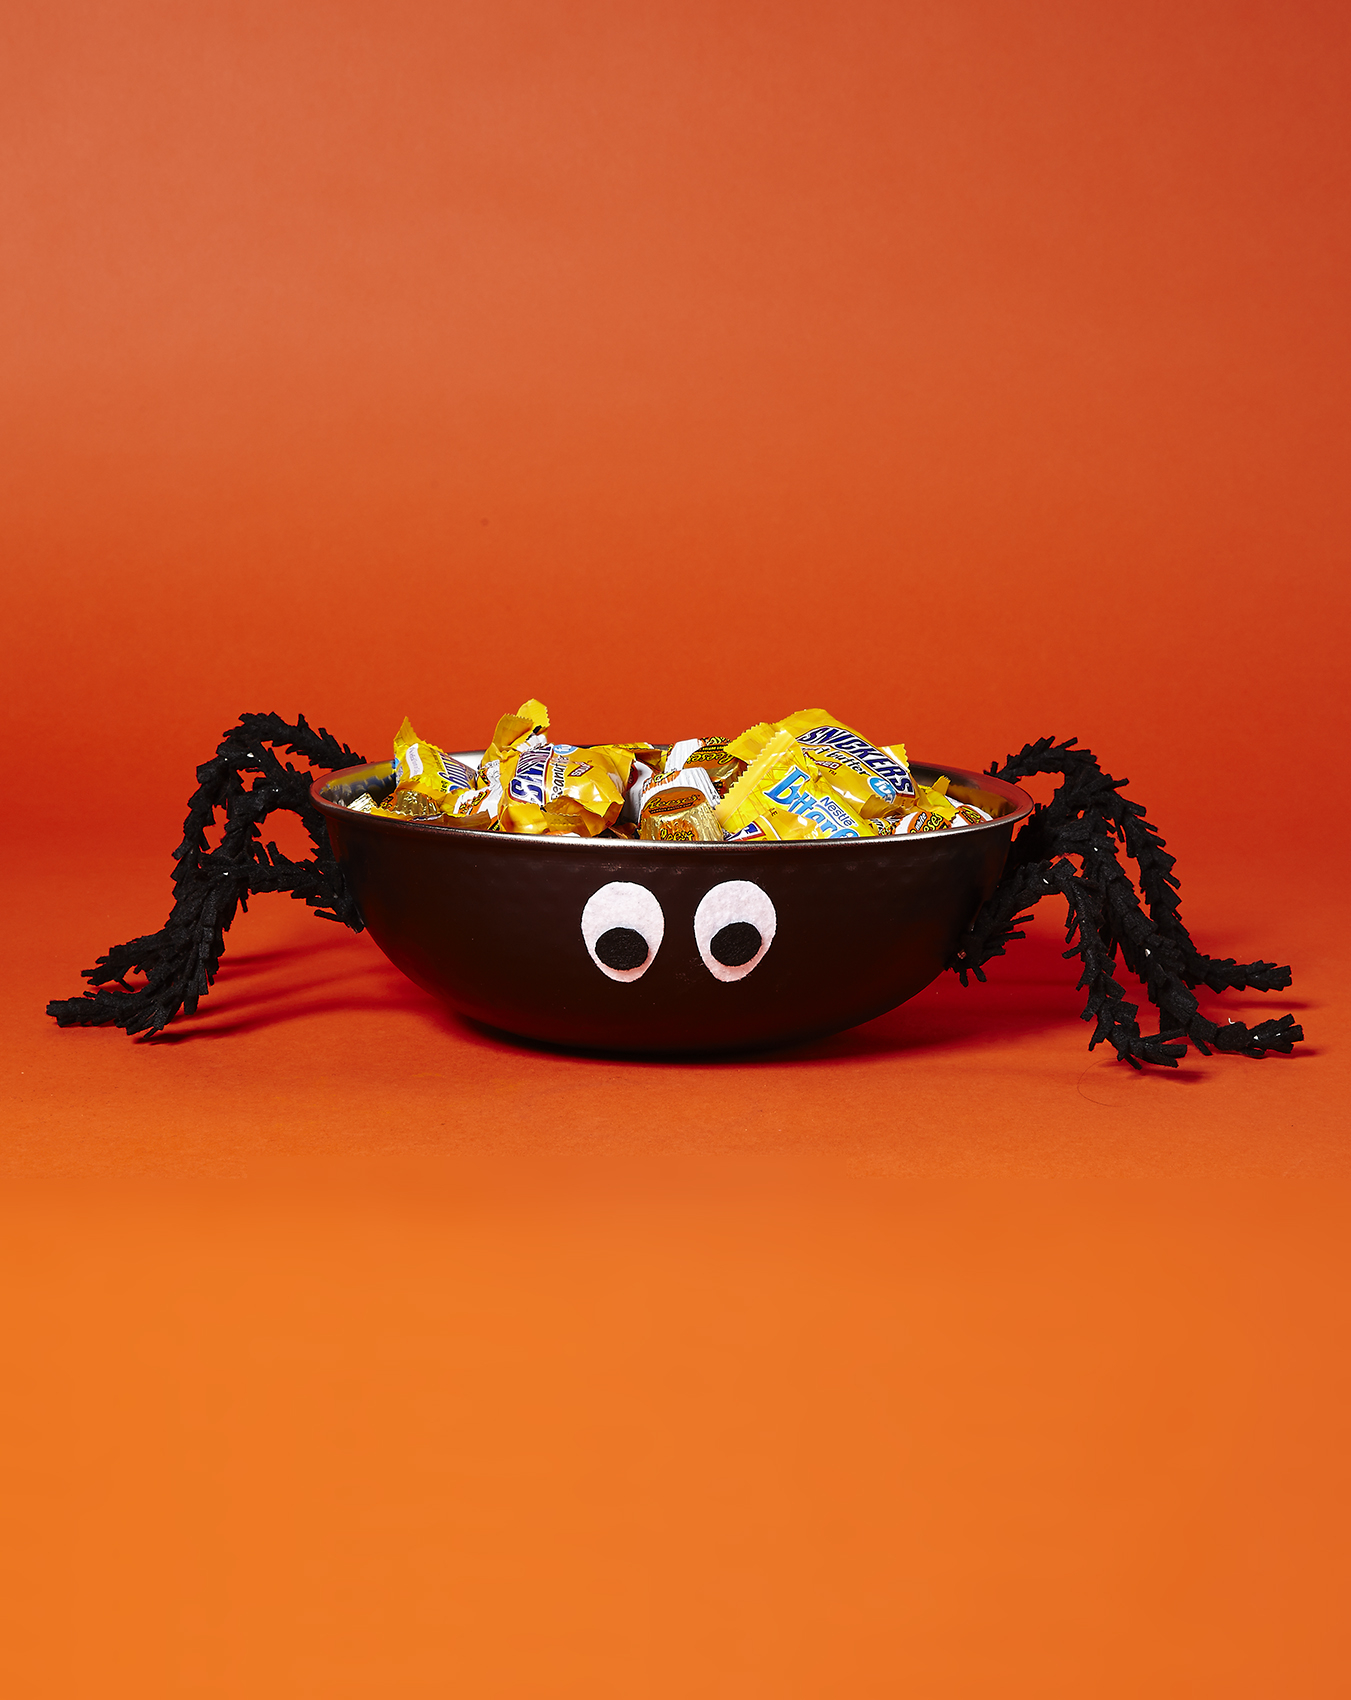 Spider bowl DIY Halloween Candy Bowls You Can Serve For Halloween Treats